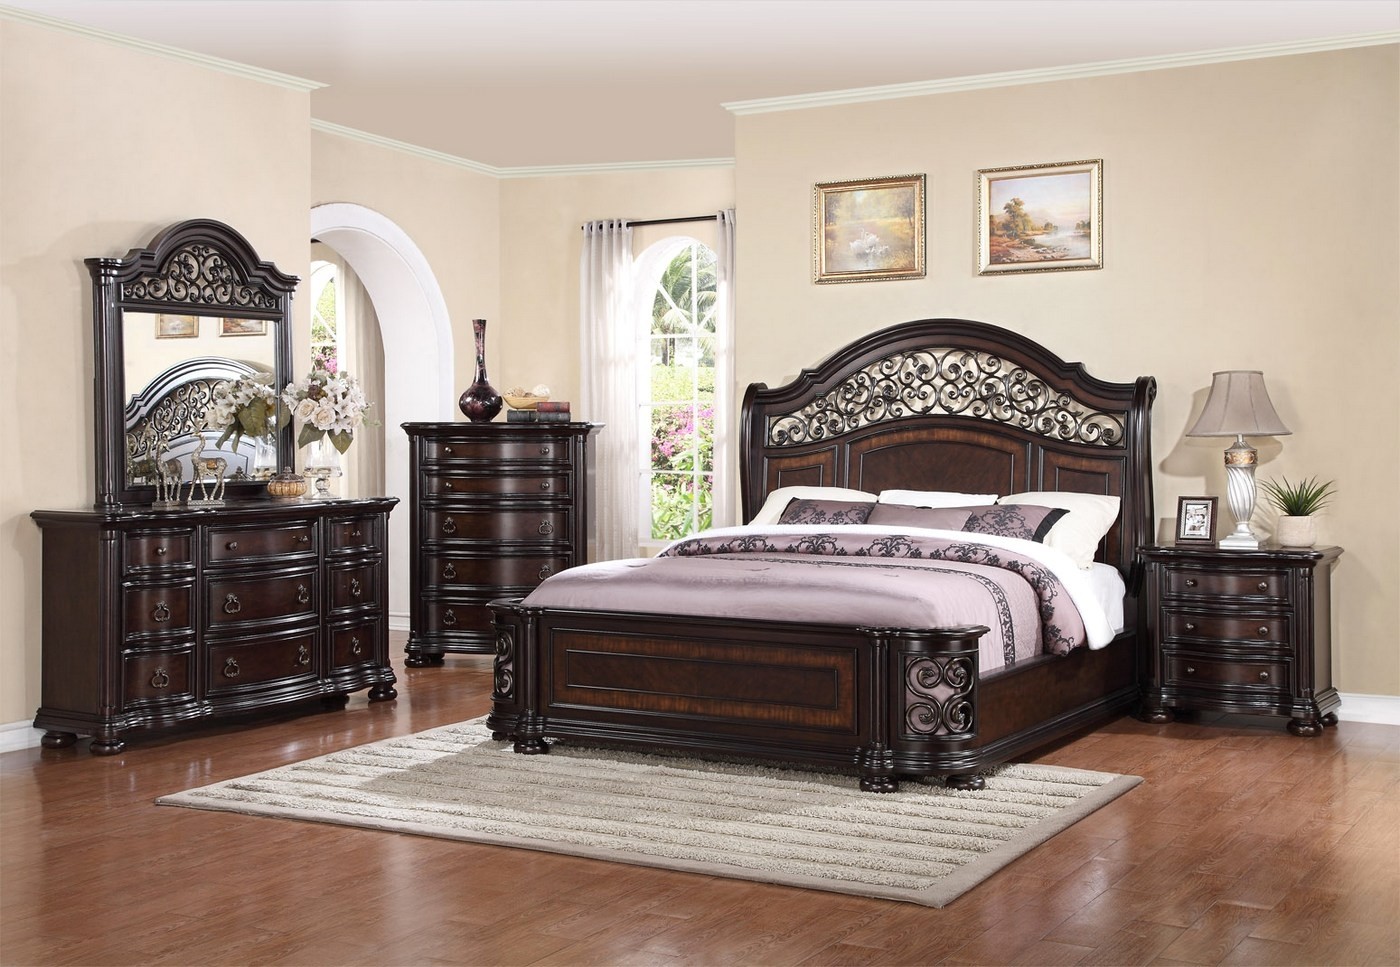 wood and wrought iron bedroom furniture